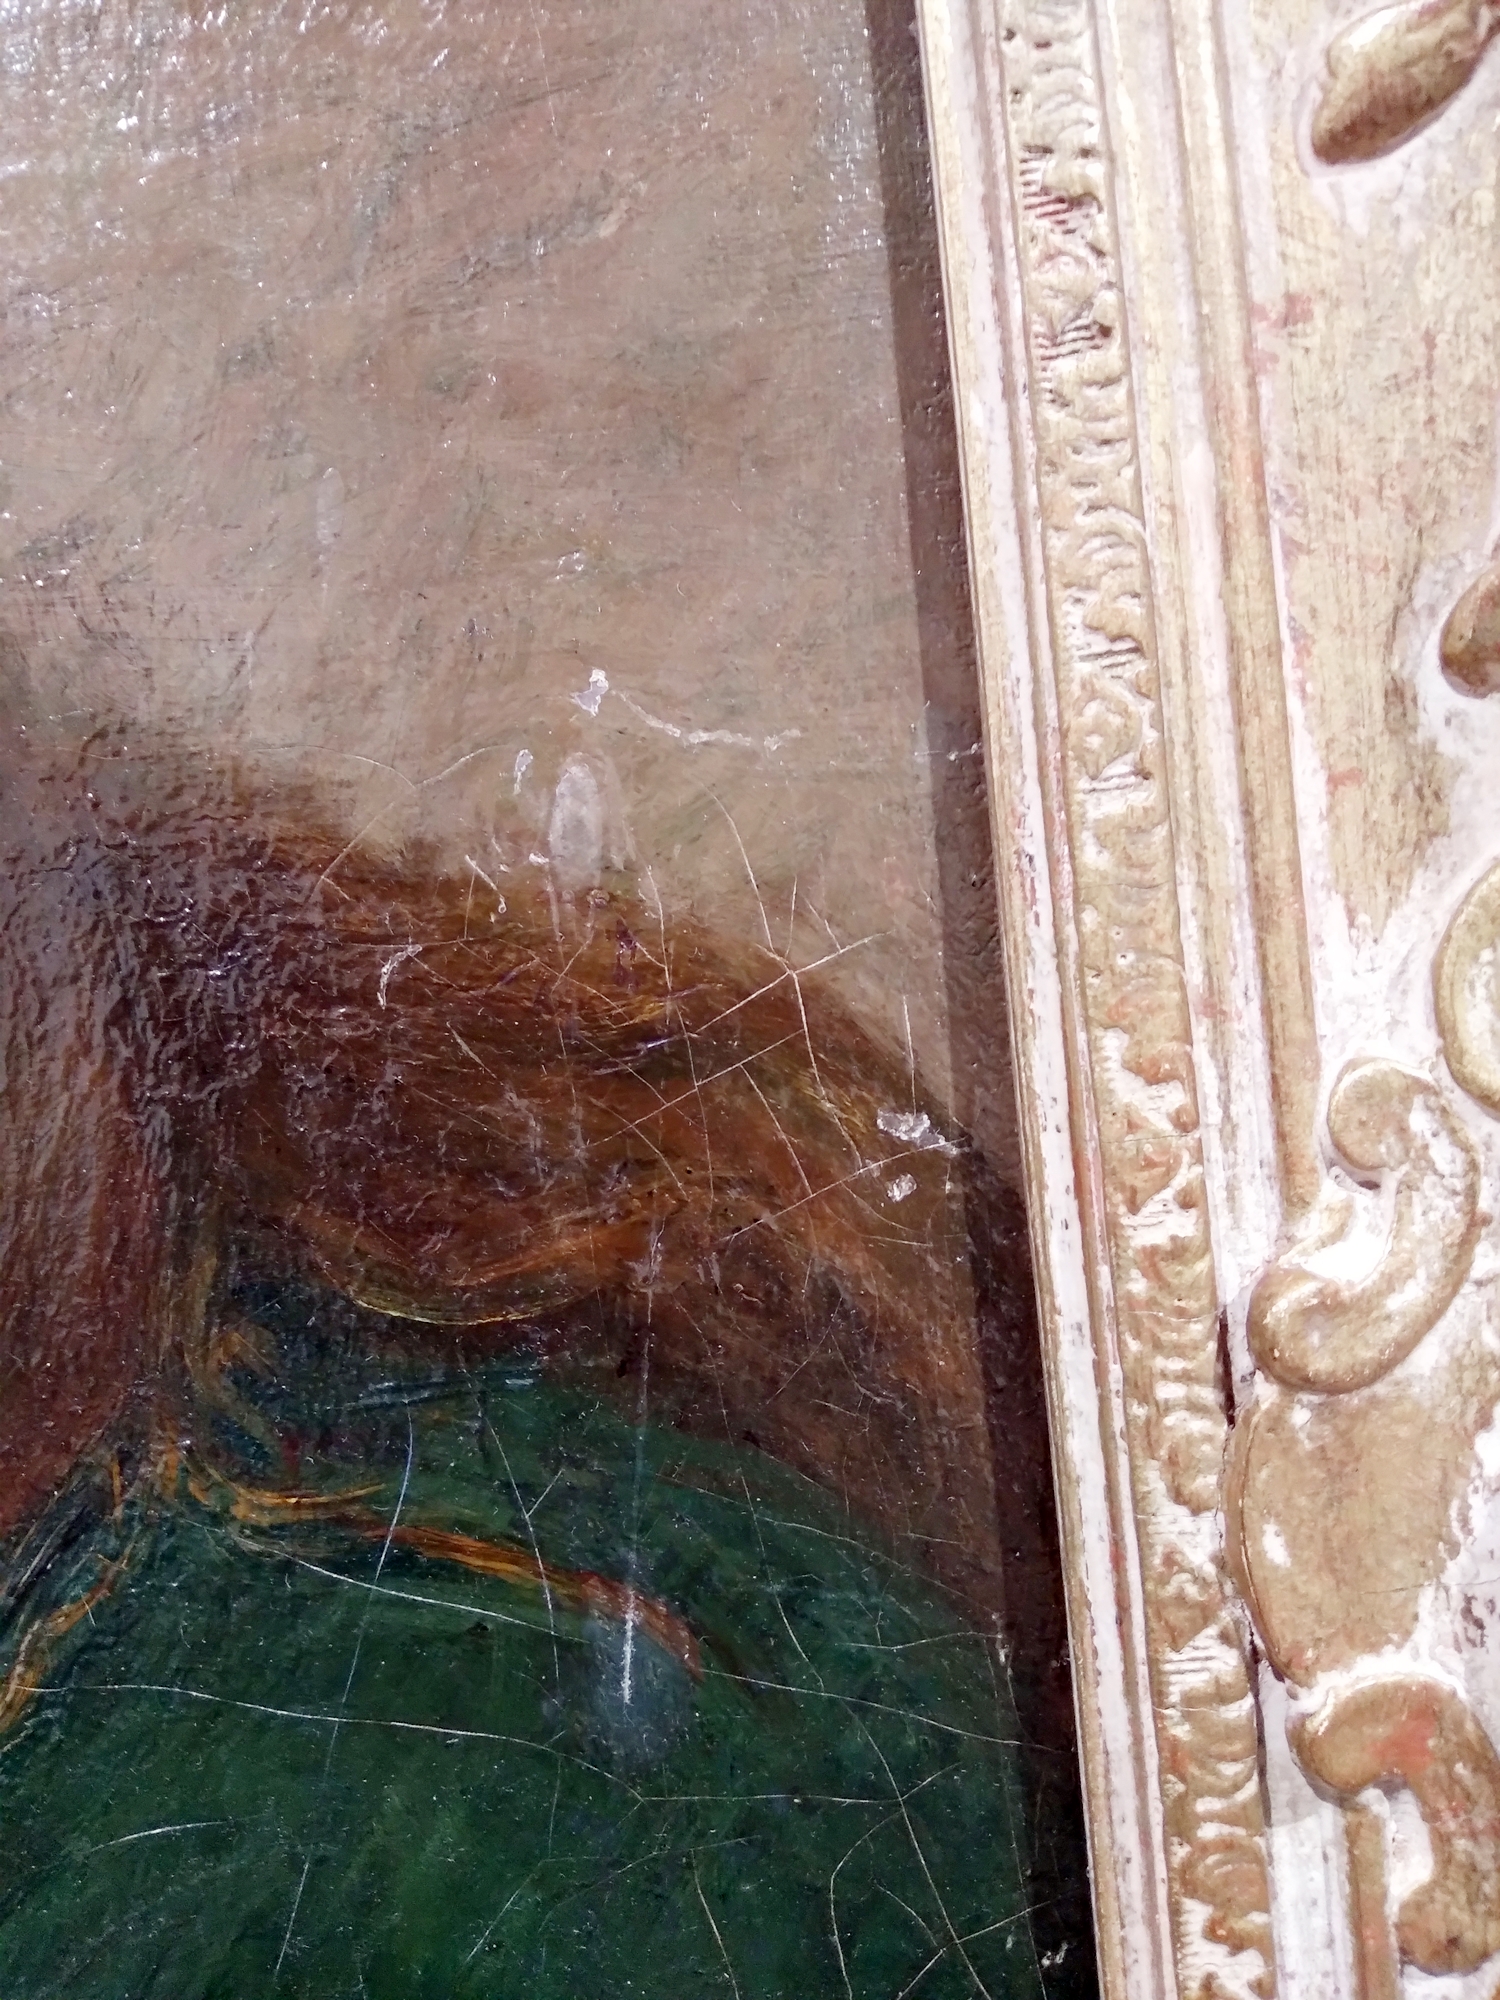 Late 19th century British School Oil on canvas Portrait of a young woman with windswept red hair - Image 7 of 24